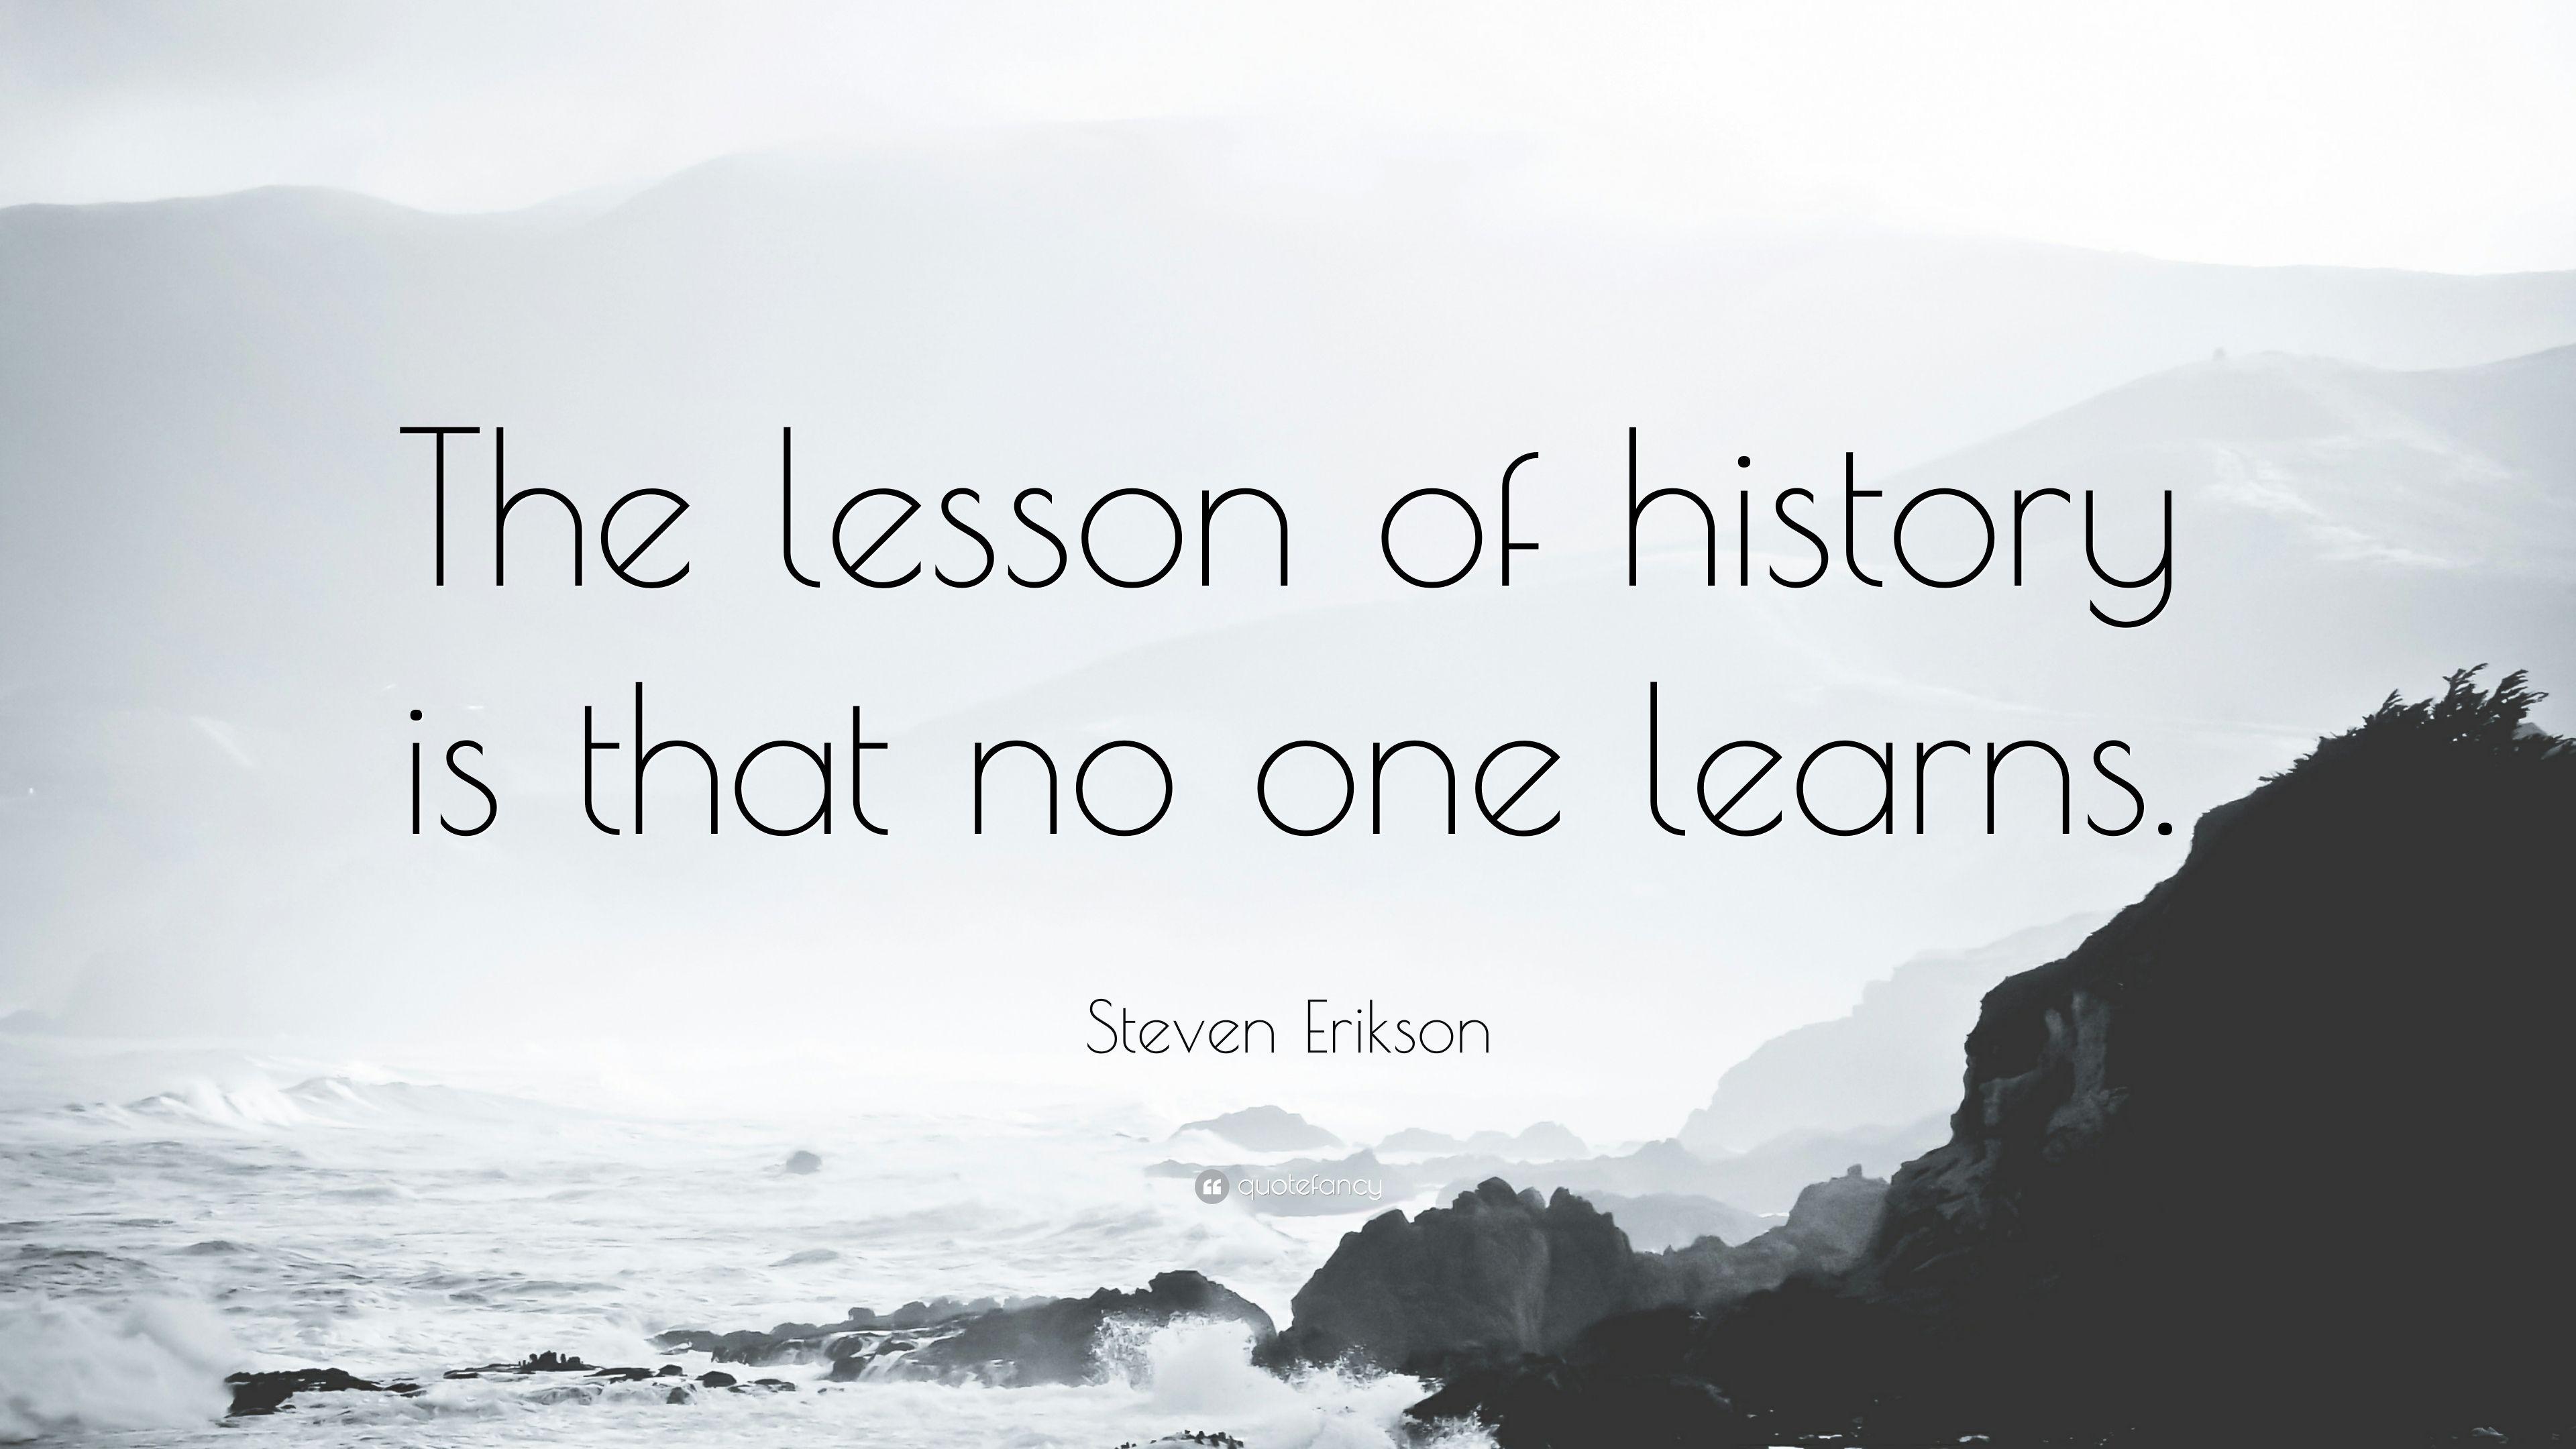 Steven Erikson Quote: “The lesson of history is that no one learns